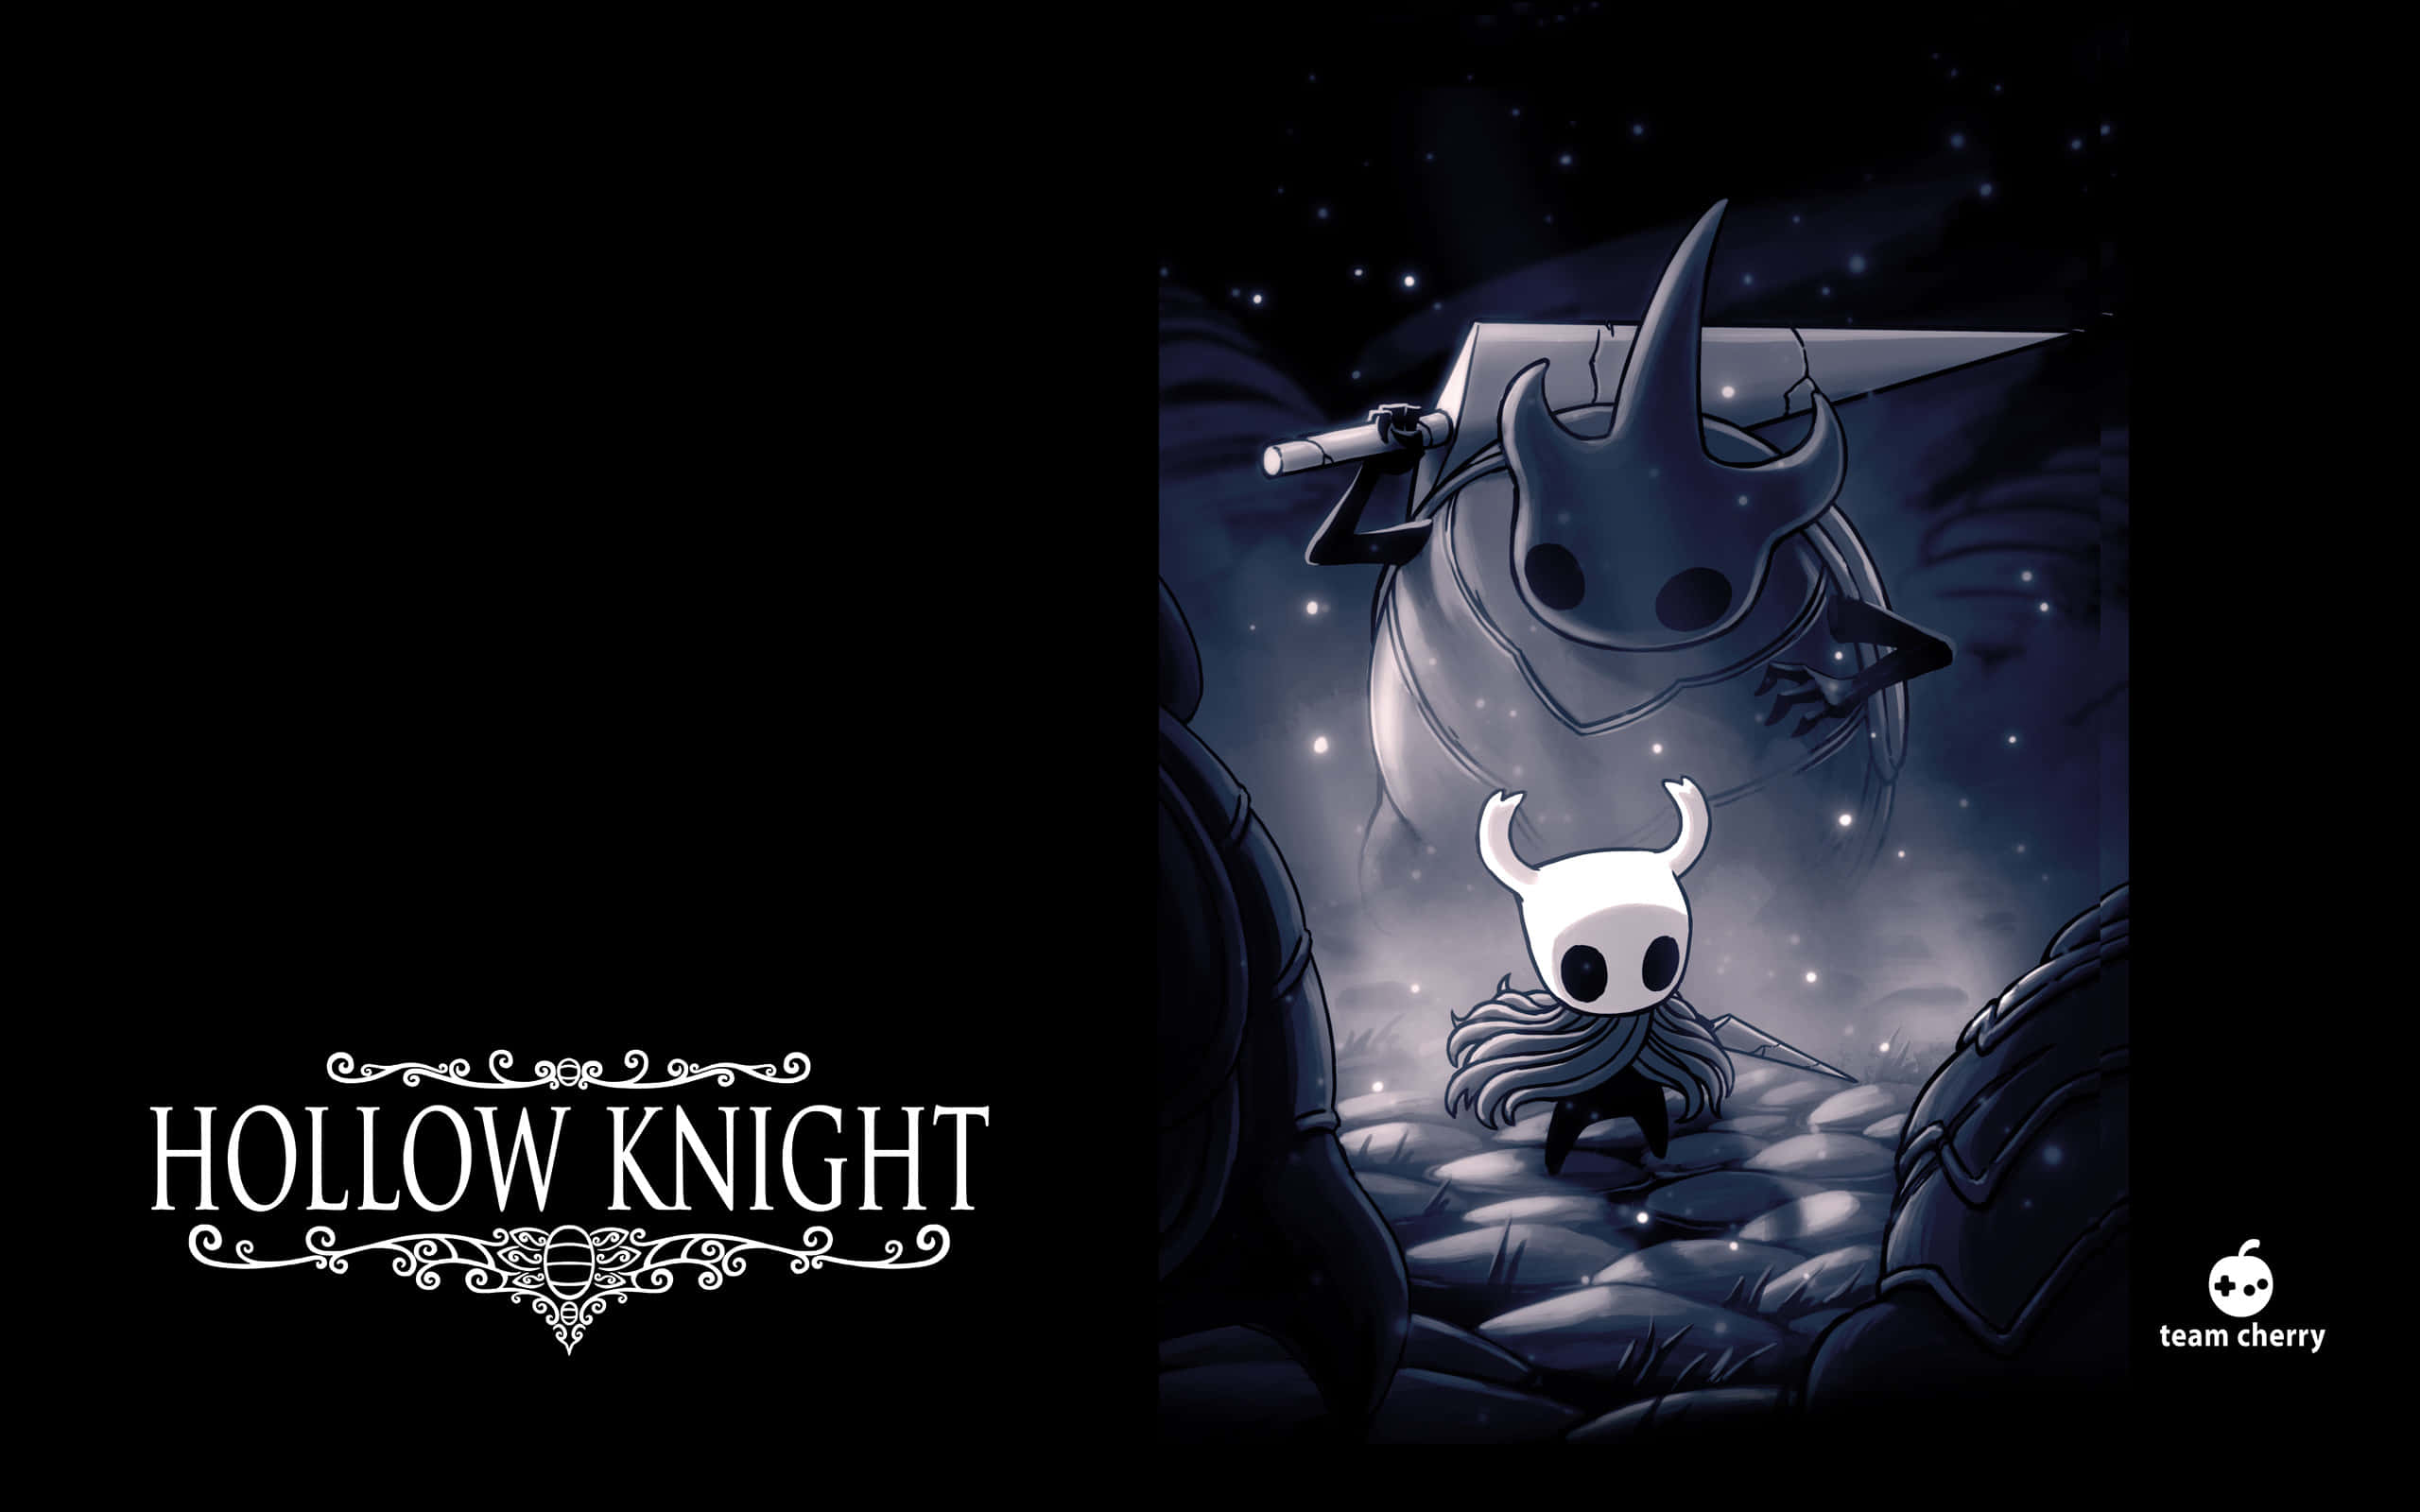 “Explore a fantastical world of forgotten ruins in Hollow Knight”